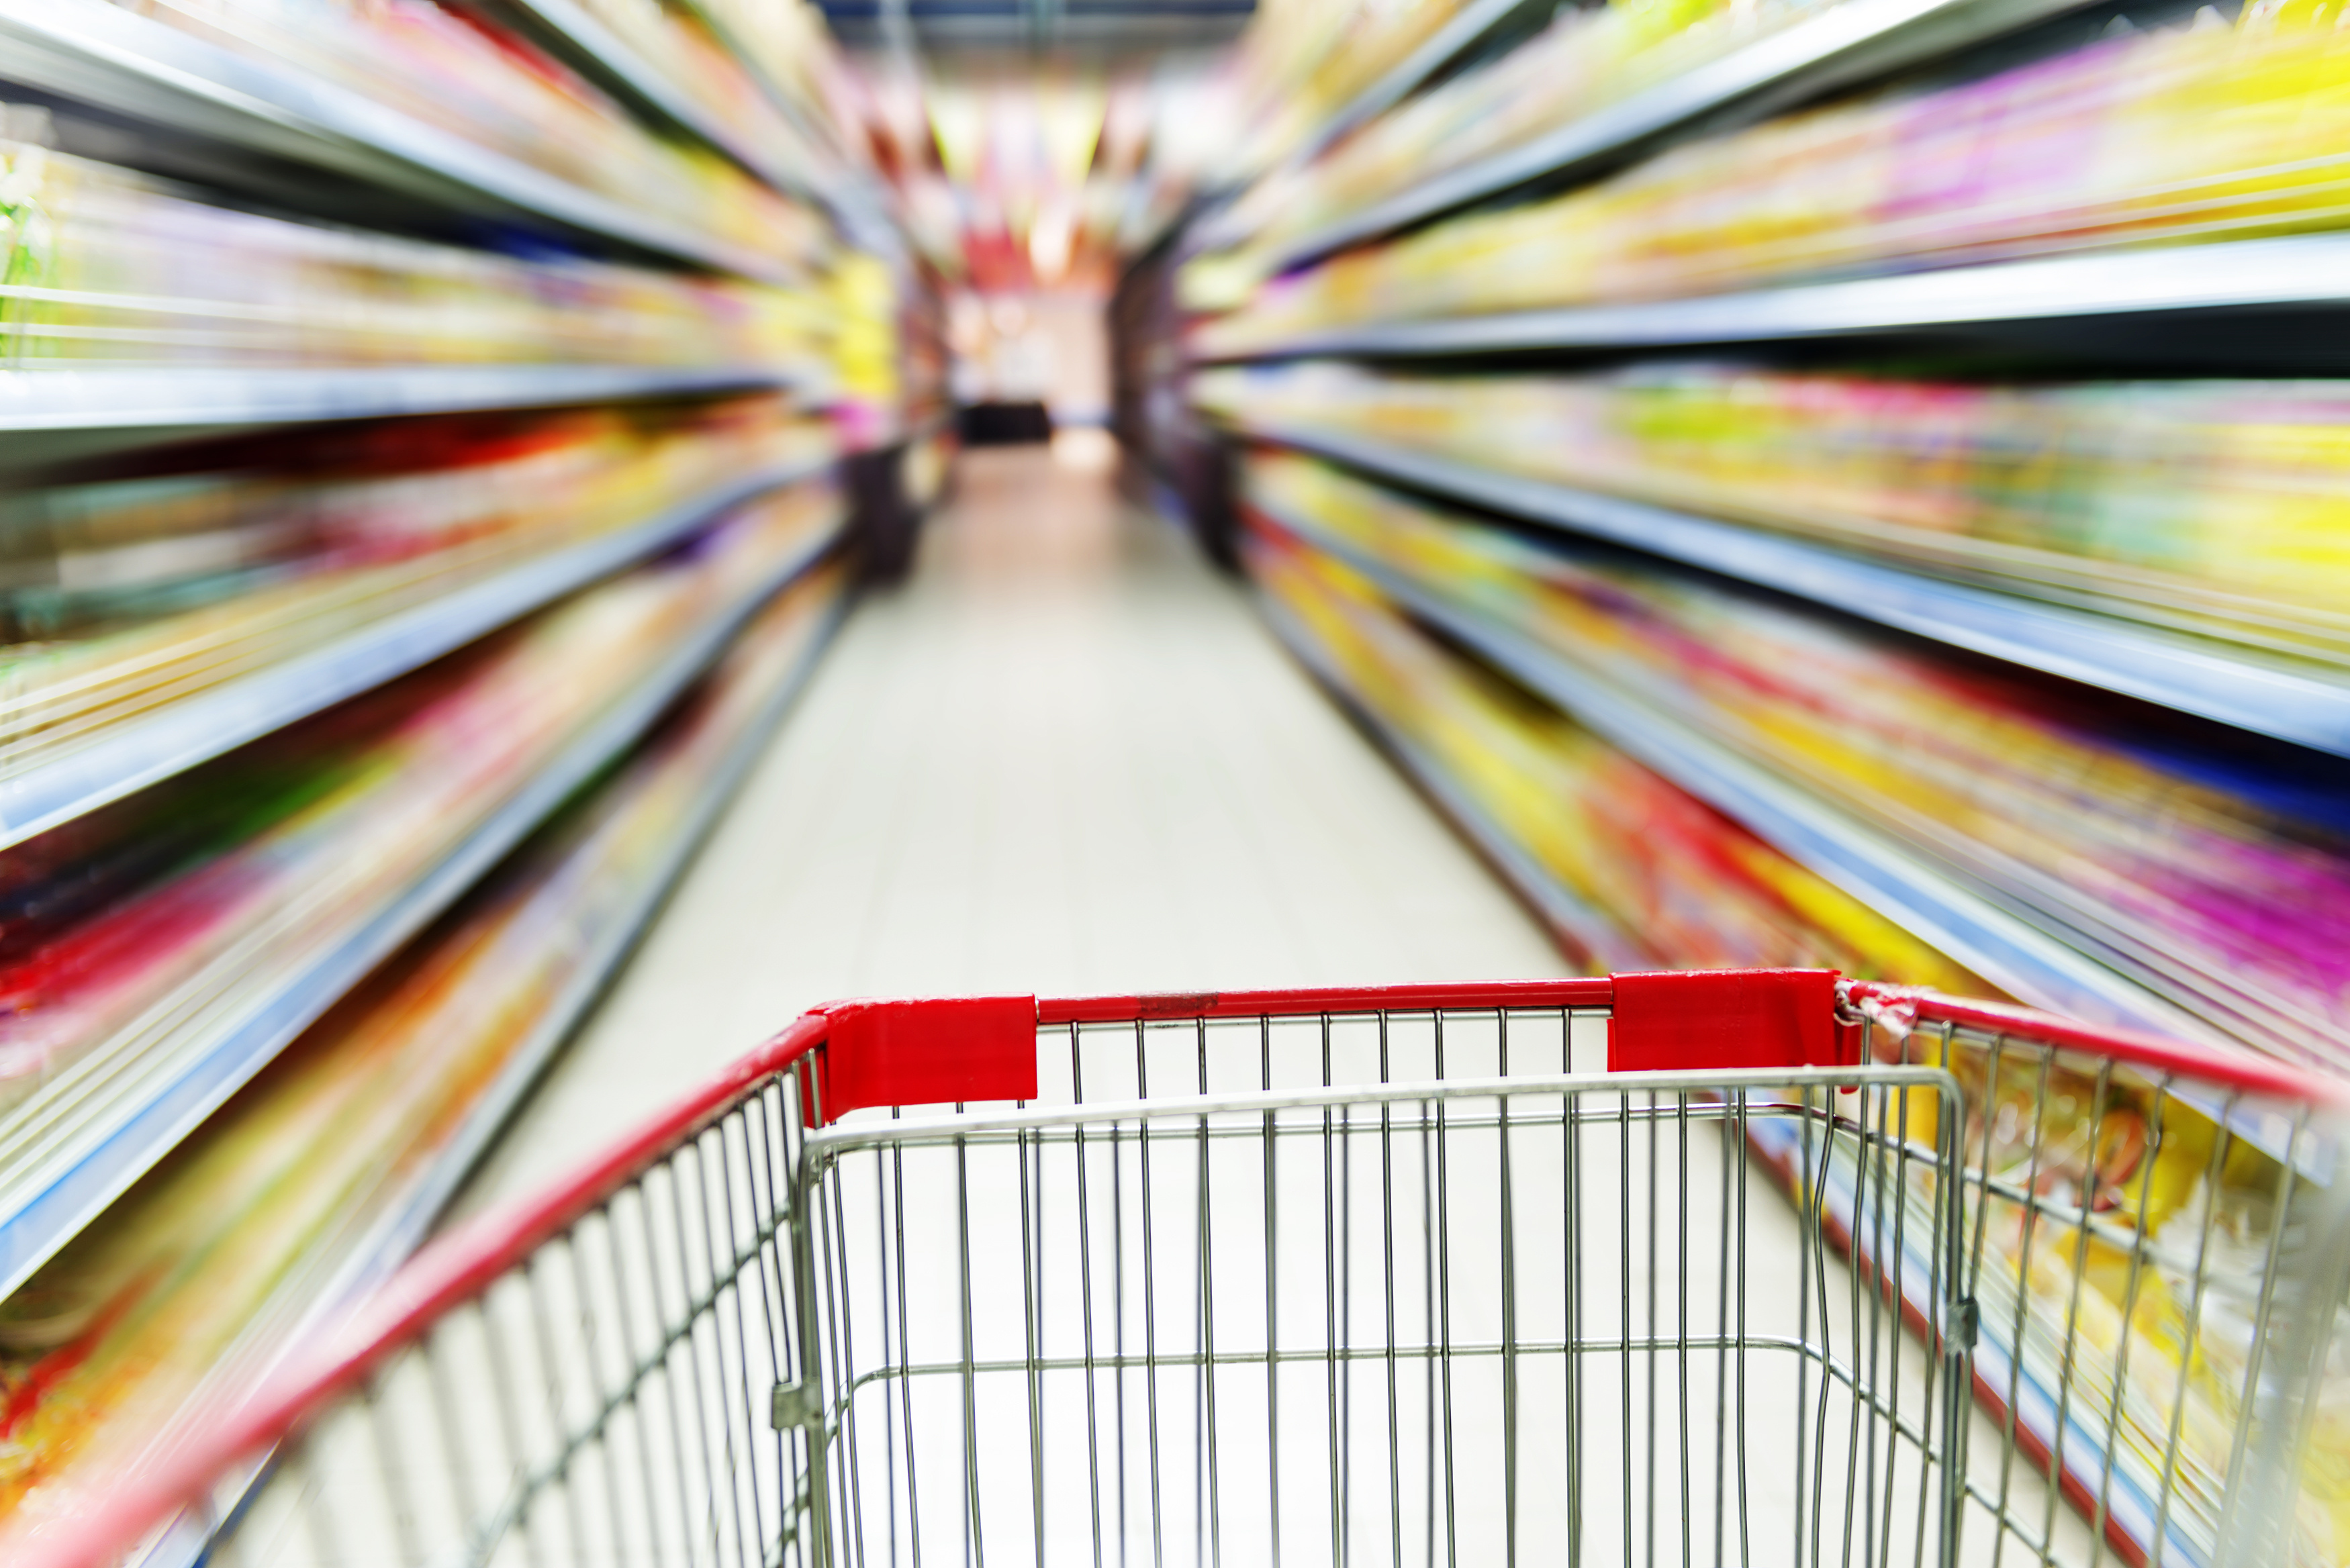 Have hypermarkets had their day? Fionnuala Carolan examines why the 'little and often' consumer trend appears to be winning the retail race